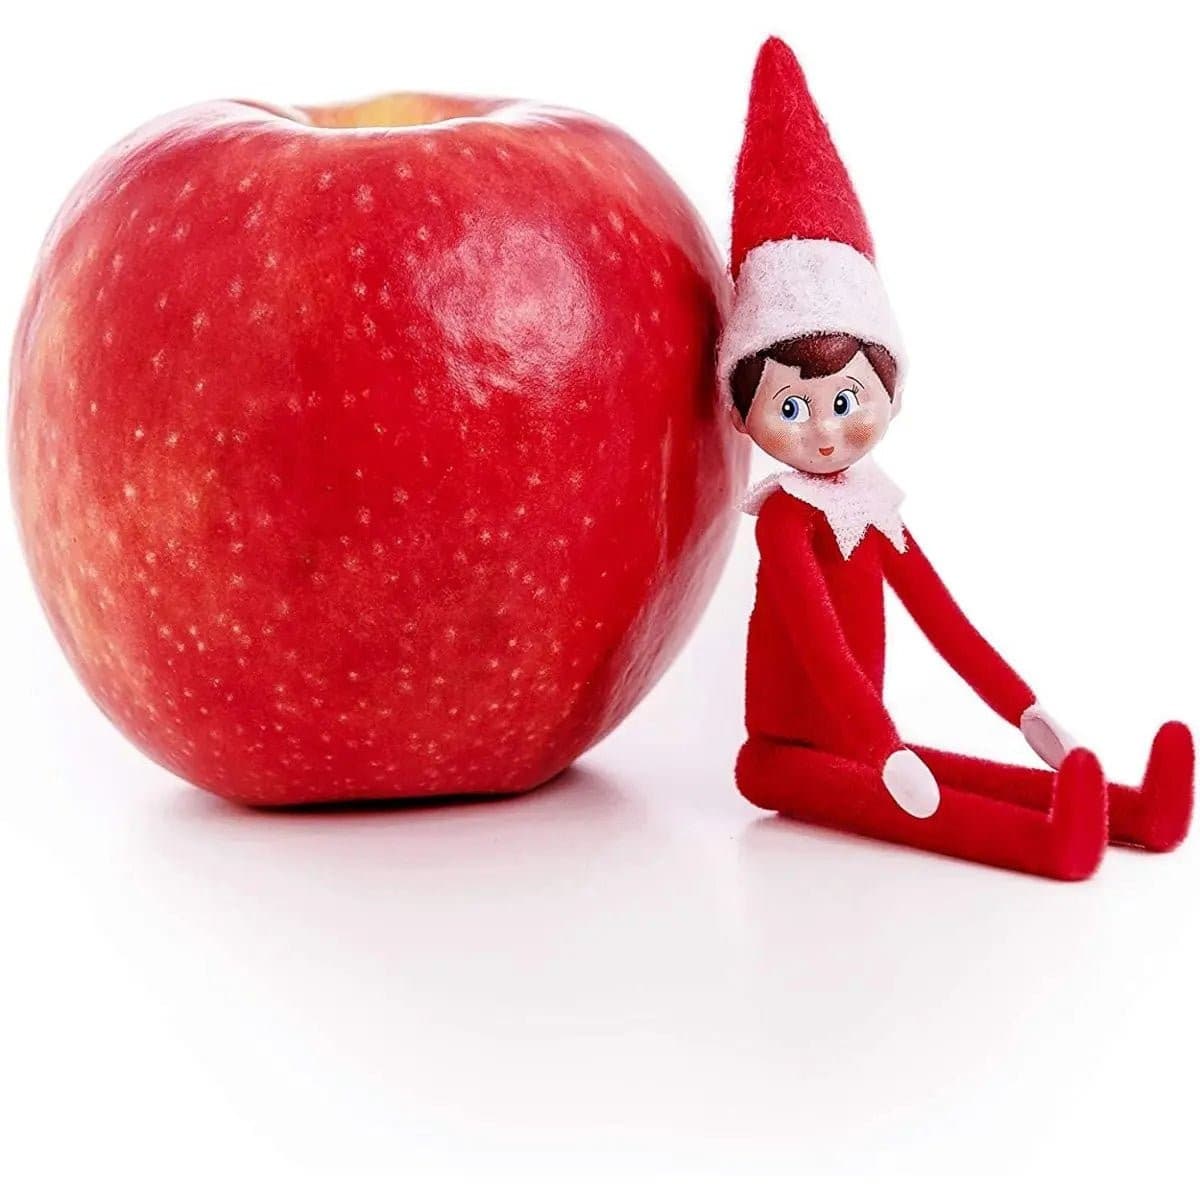 World’s Smallest The Elf on the Shelf - Simon's Collectibles